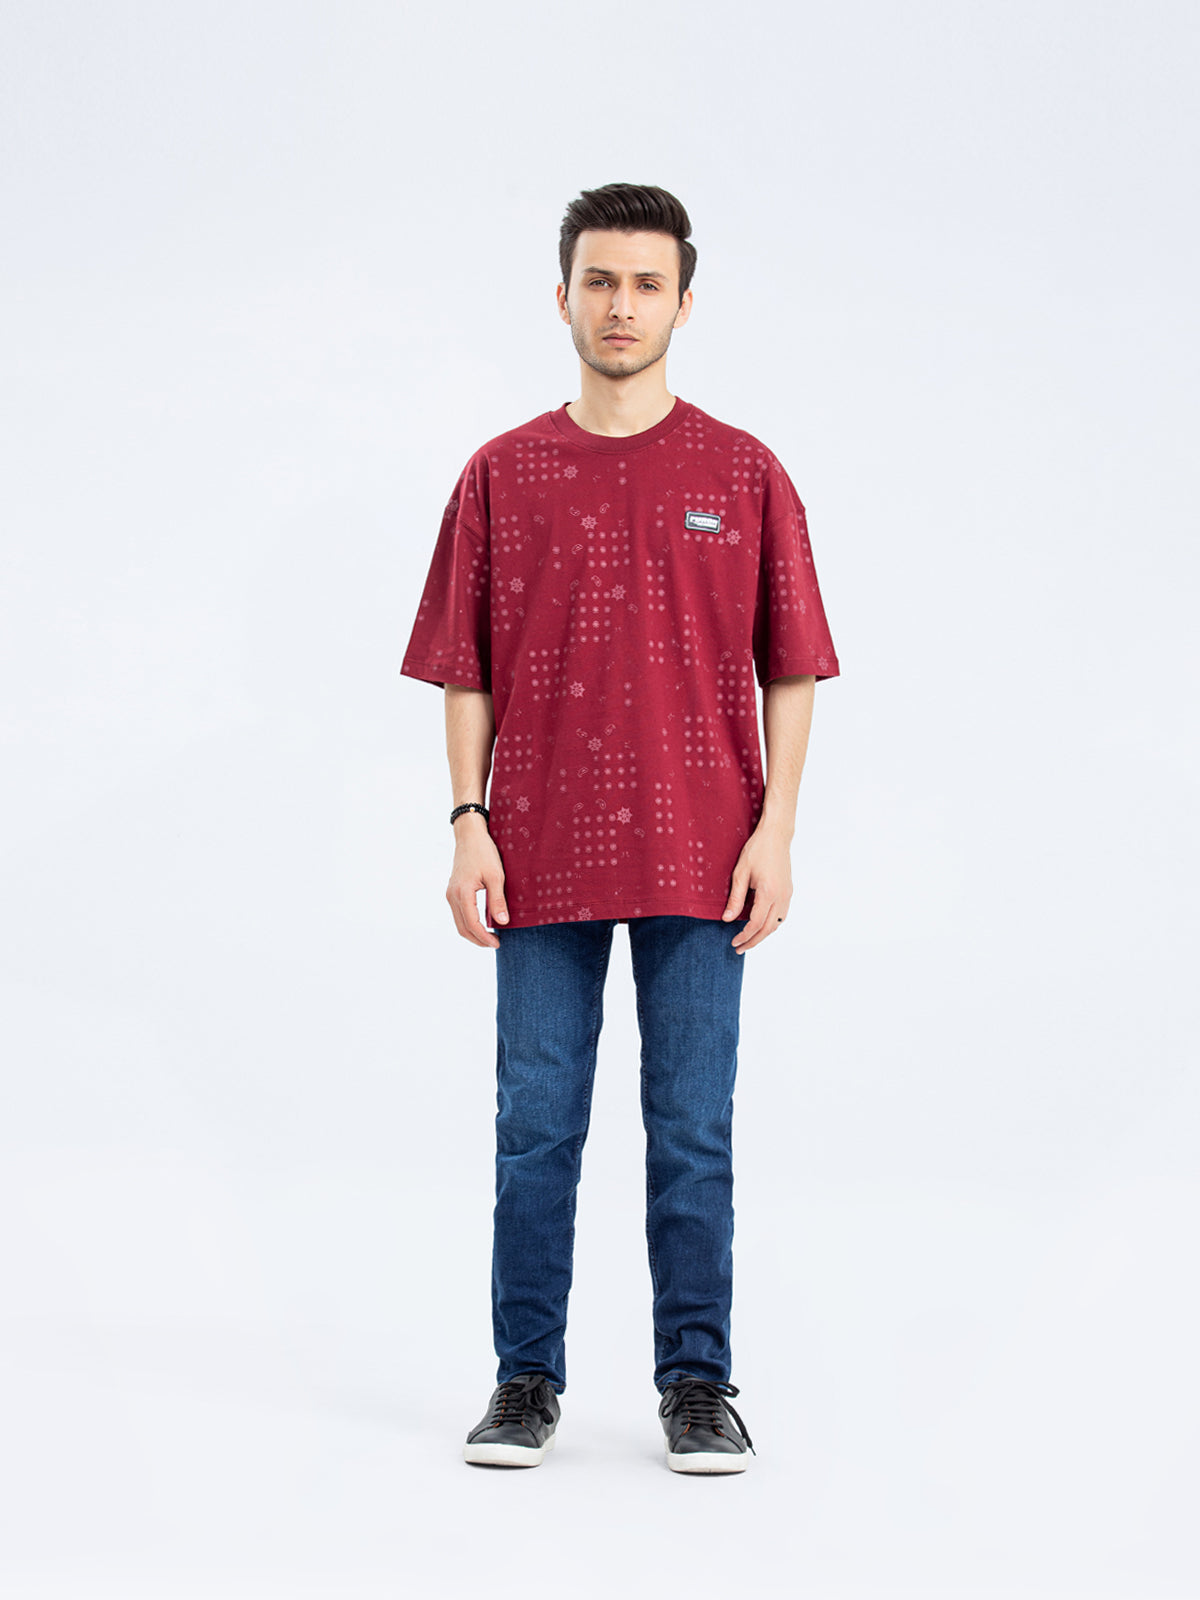 Relaxed Fit Graphic Tee - FMTGT24-010